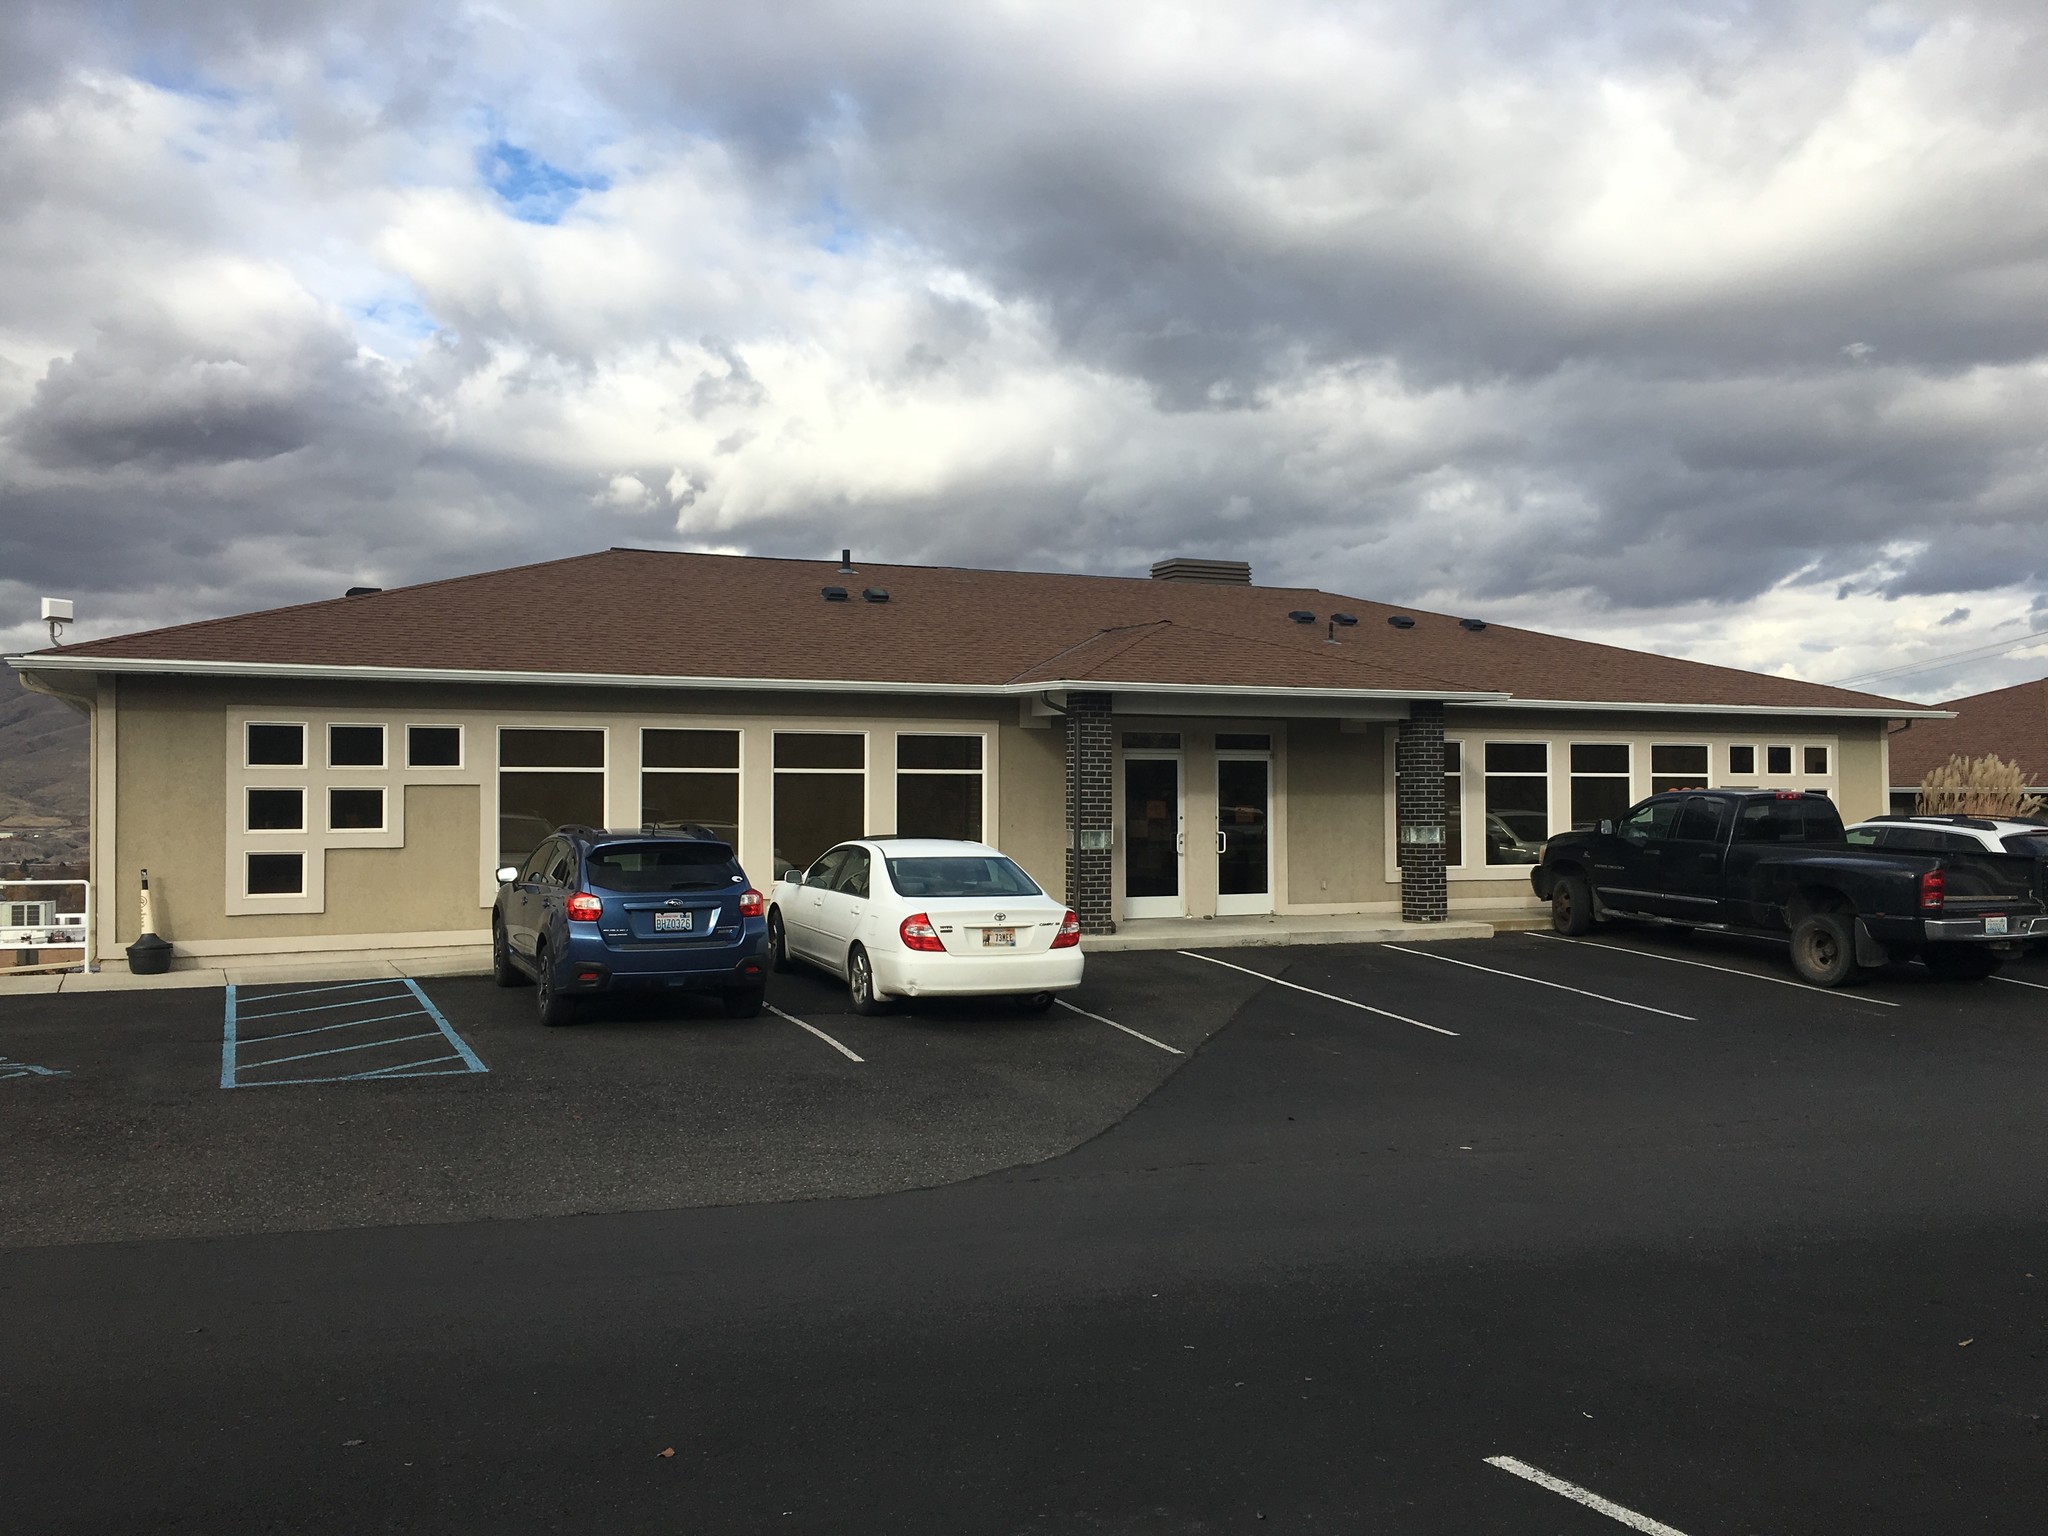 6.46 Cap Single Tenant Medical Office - 3.5% Annual Increases: Easy access both levels